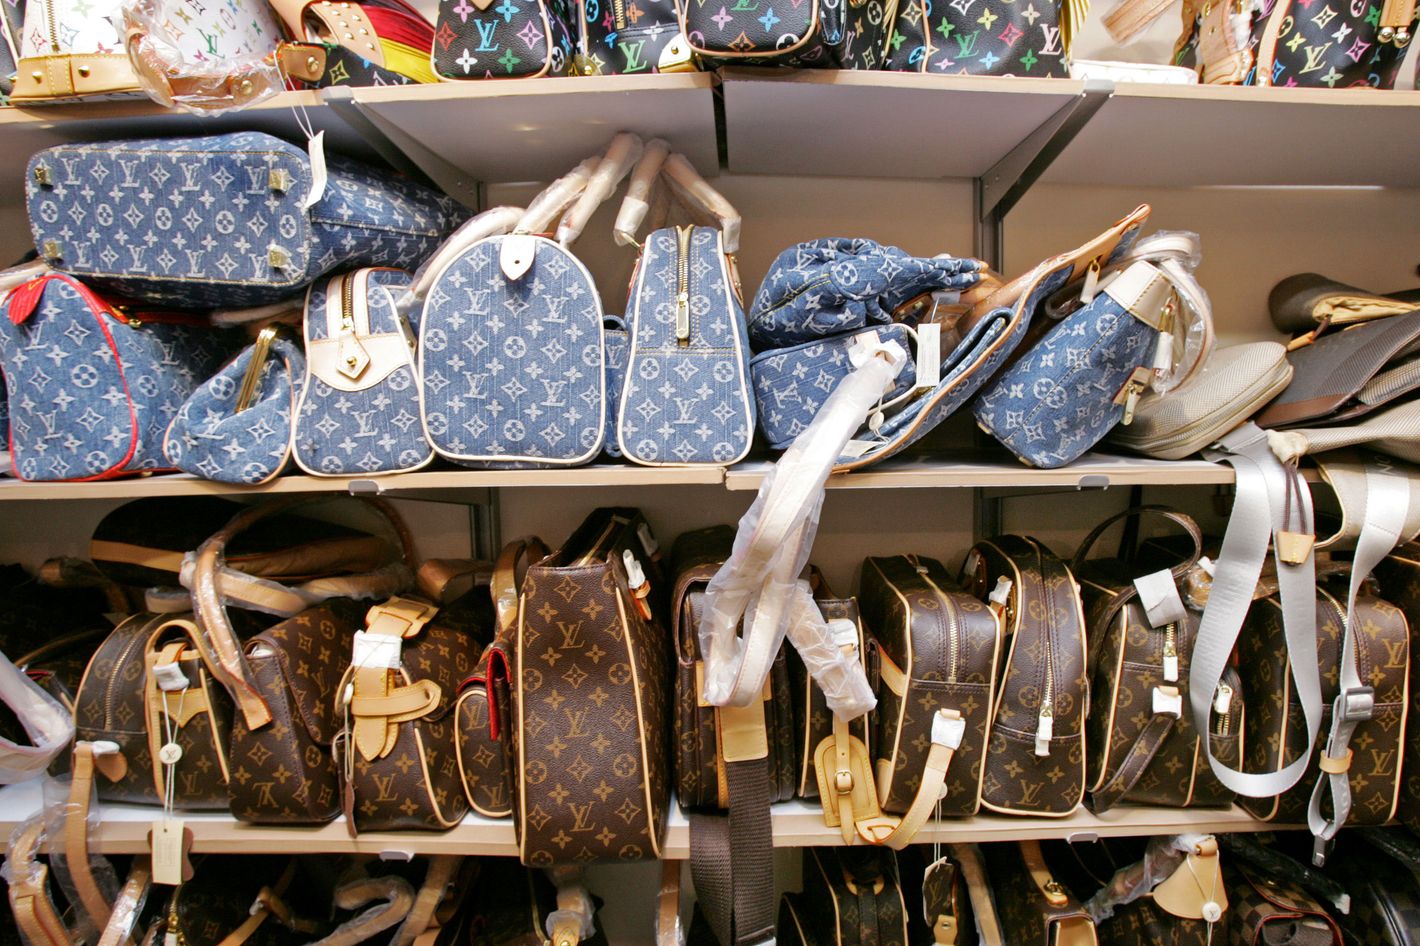 Facebook Is Littered With Ads for Fake Luxury Goods